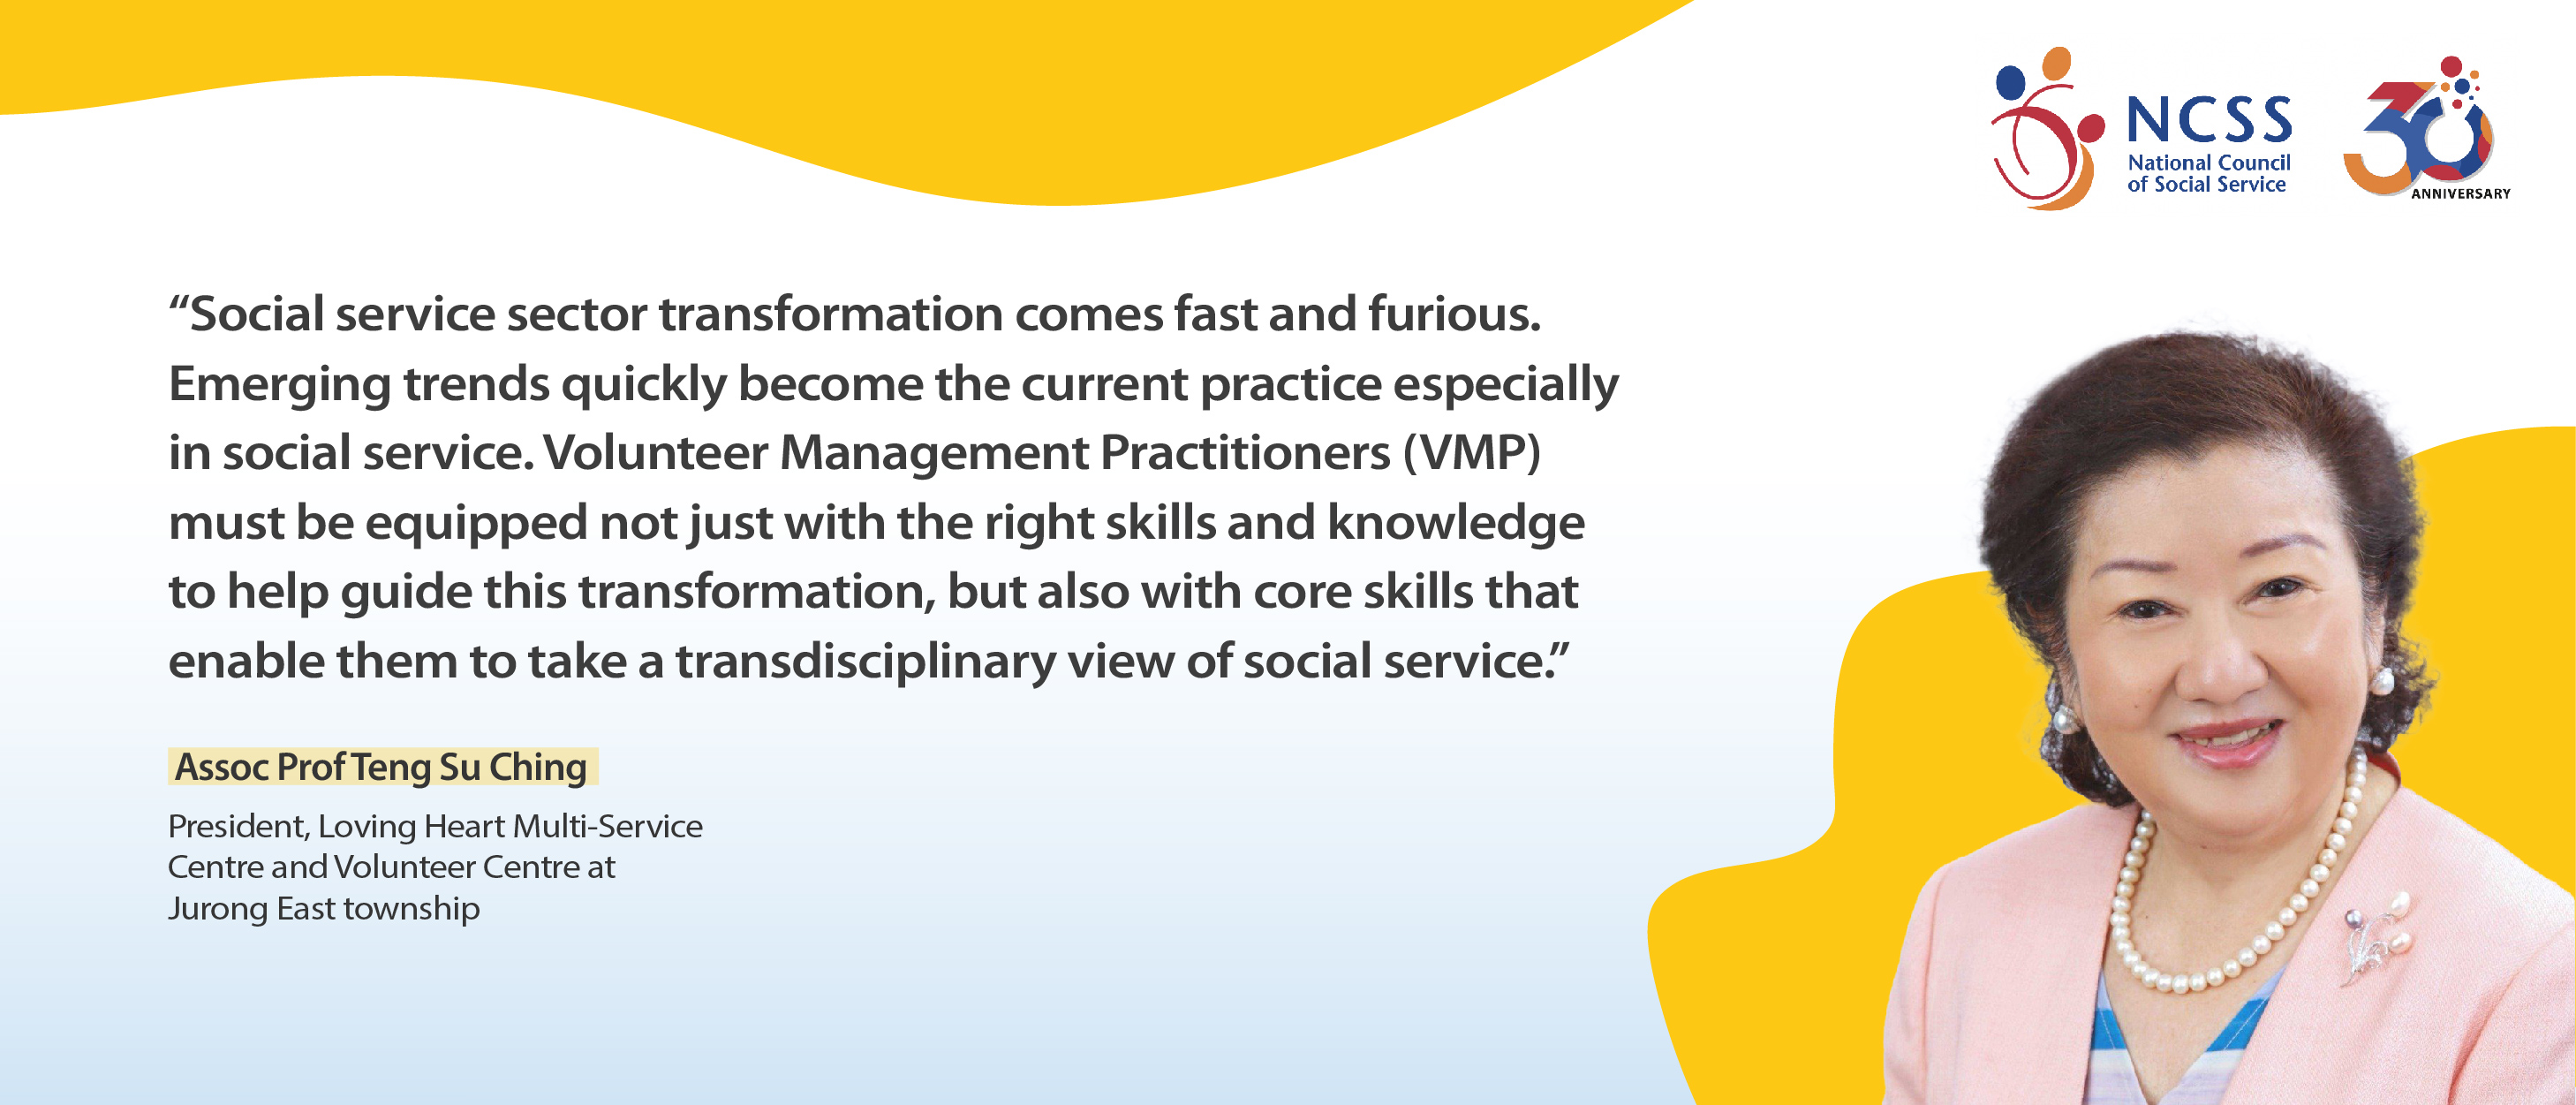 A comment about Learning & Development Roadmap by president of loving heart multi service centre and volunteer centre, Assoc Prof Teng Su Ching, "Social service sector transformation comes fast and furious. Emerging trends quickly become the current practice especially in social service. volunteer management practitioners (VMP) must be equipped not just with the right skills and knowledge to help guide this transformation, but also with core skills that enable them to take a transdisciplinary view of social service."